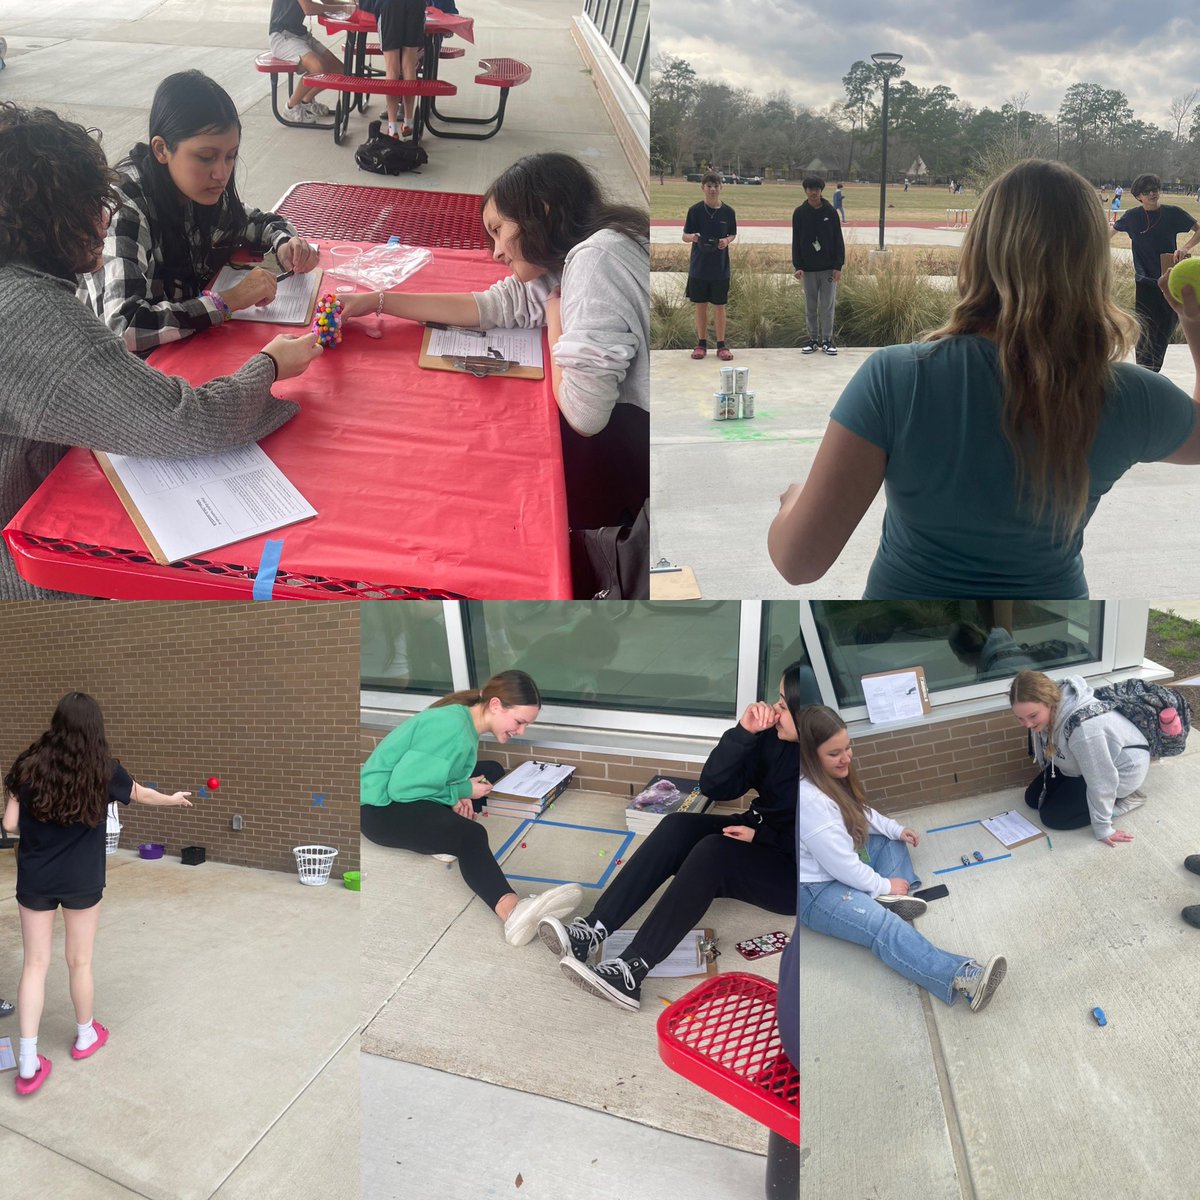 KMS 8th grade Science exploring Newton’s Laws of Motion hands-on! @coachsternerKMS @MsThomason_KMS 🥼❤️🖤#KMSCougarPride #DoingScience #HumbleISD_2ndSci #AwesomeTeam